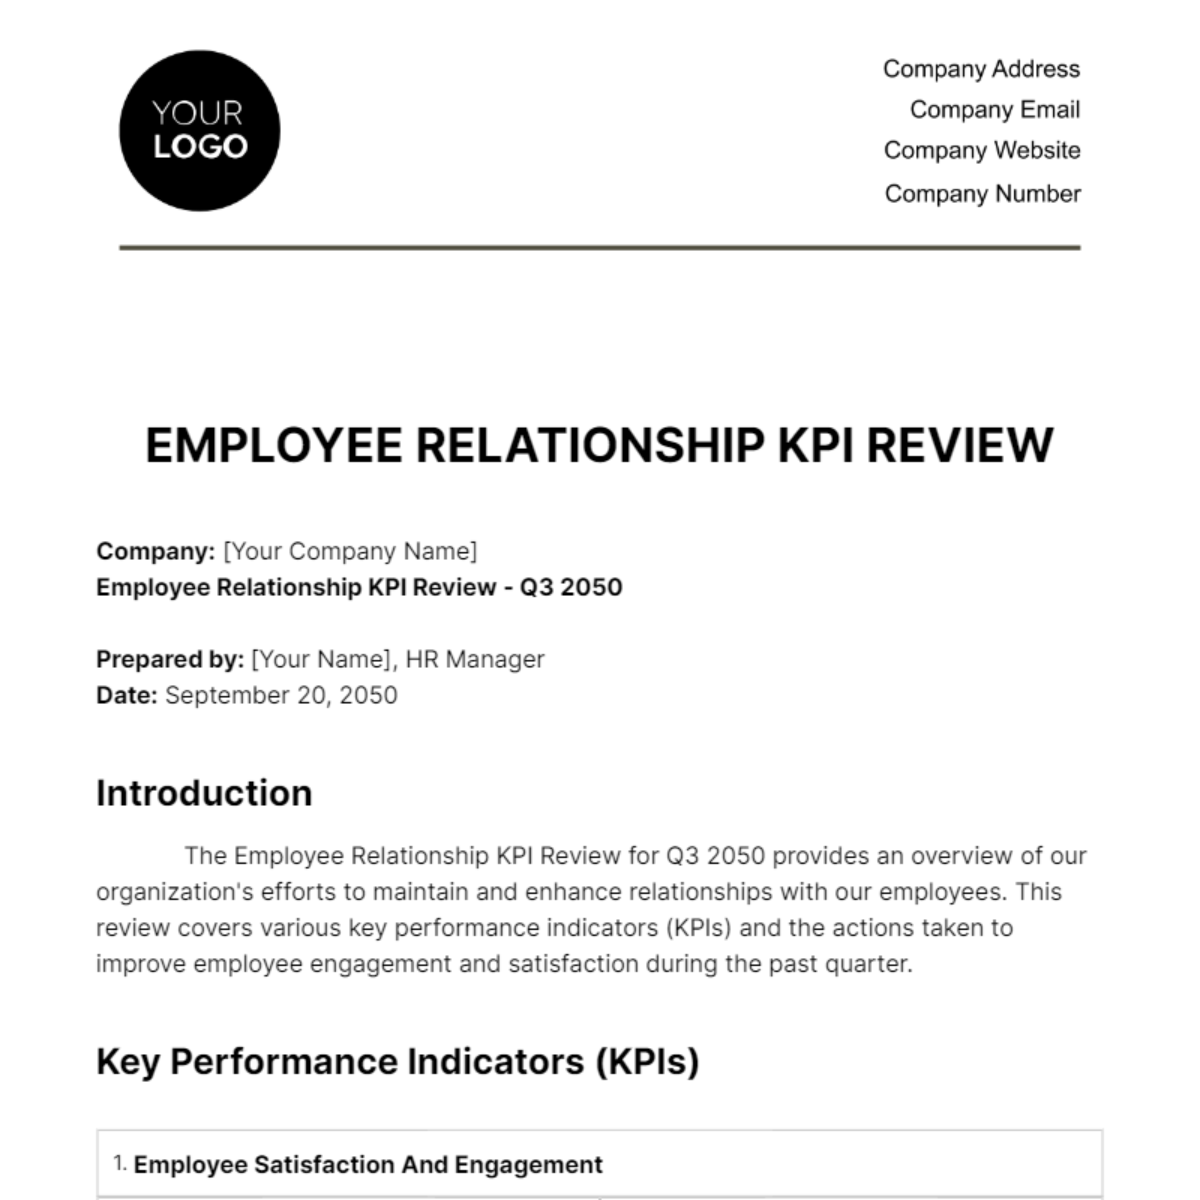 Free Employee Relationship KPI Review HR Template